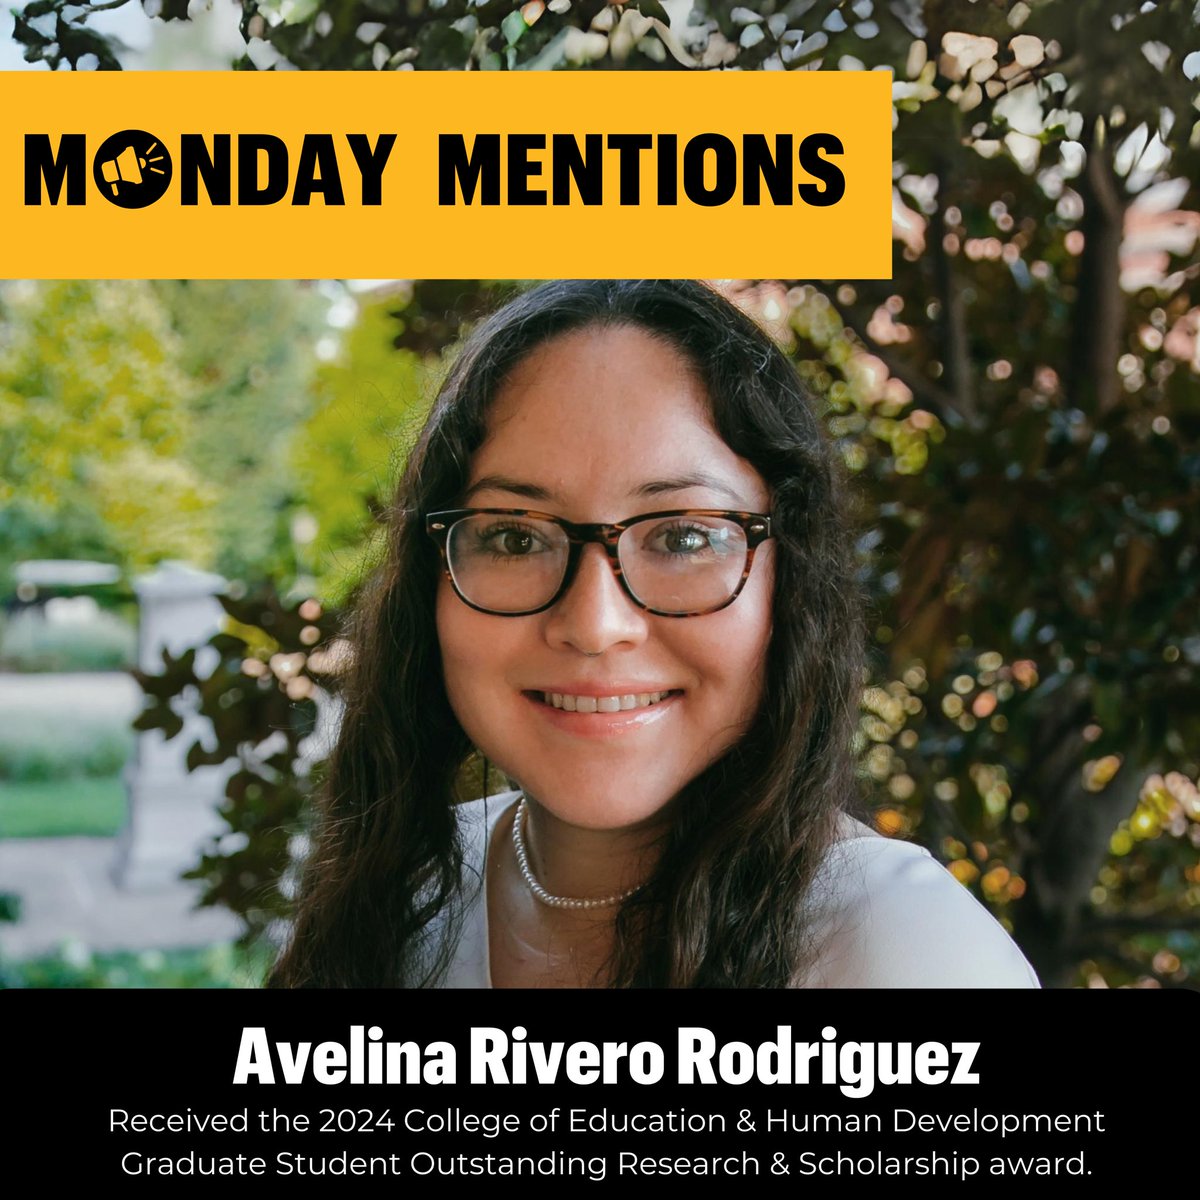 Avelina Rivero Rodriguez is this week’s #MondayMention. She received the 2024 College of Education & Human Development Graduate Student Outstanding Research & Scholarship award! Congratulations on this achievement, Avelina!